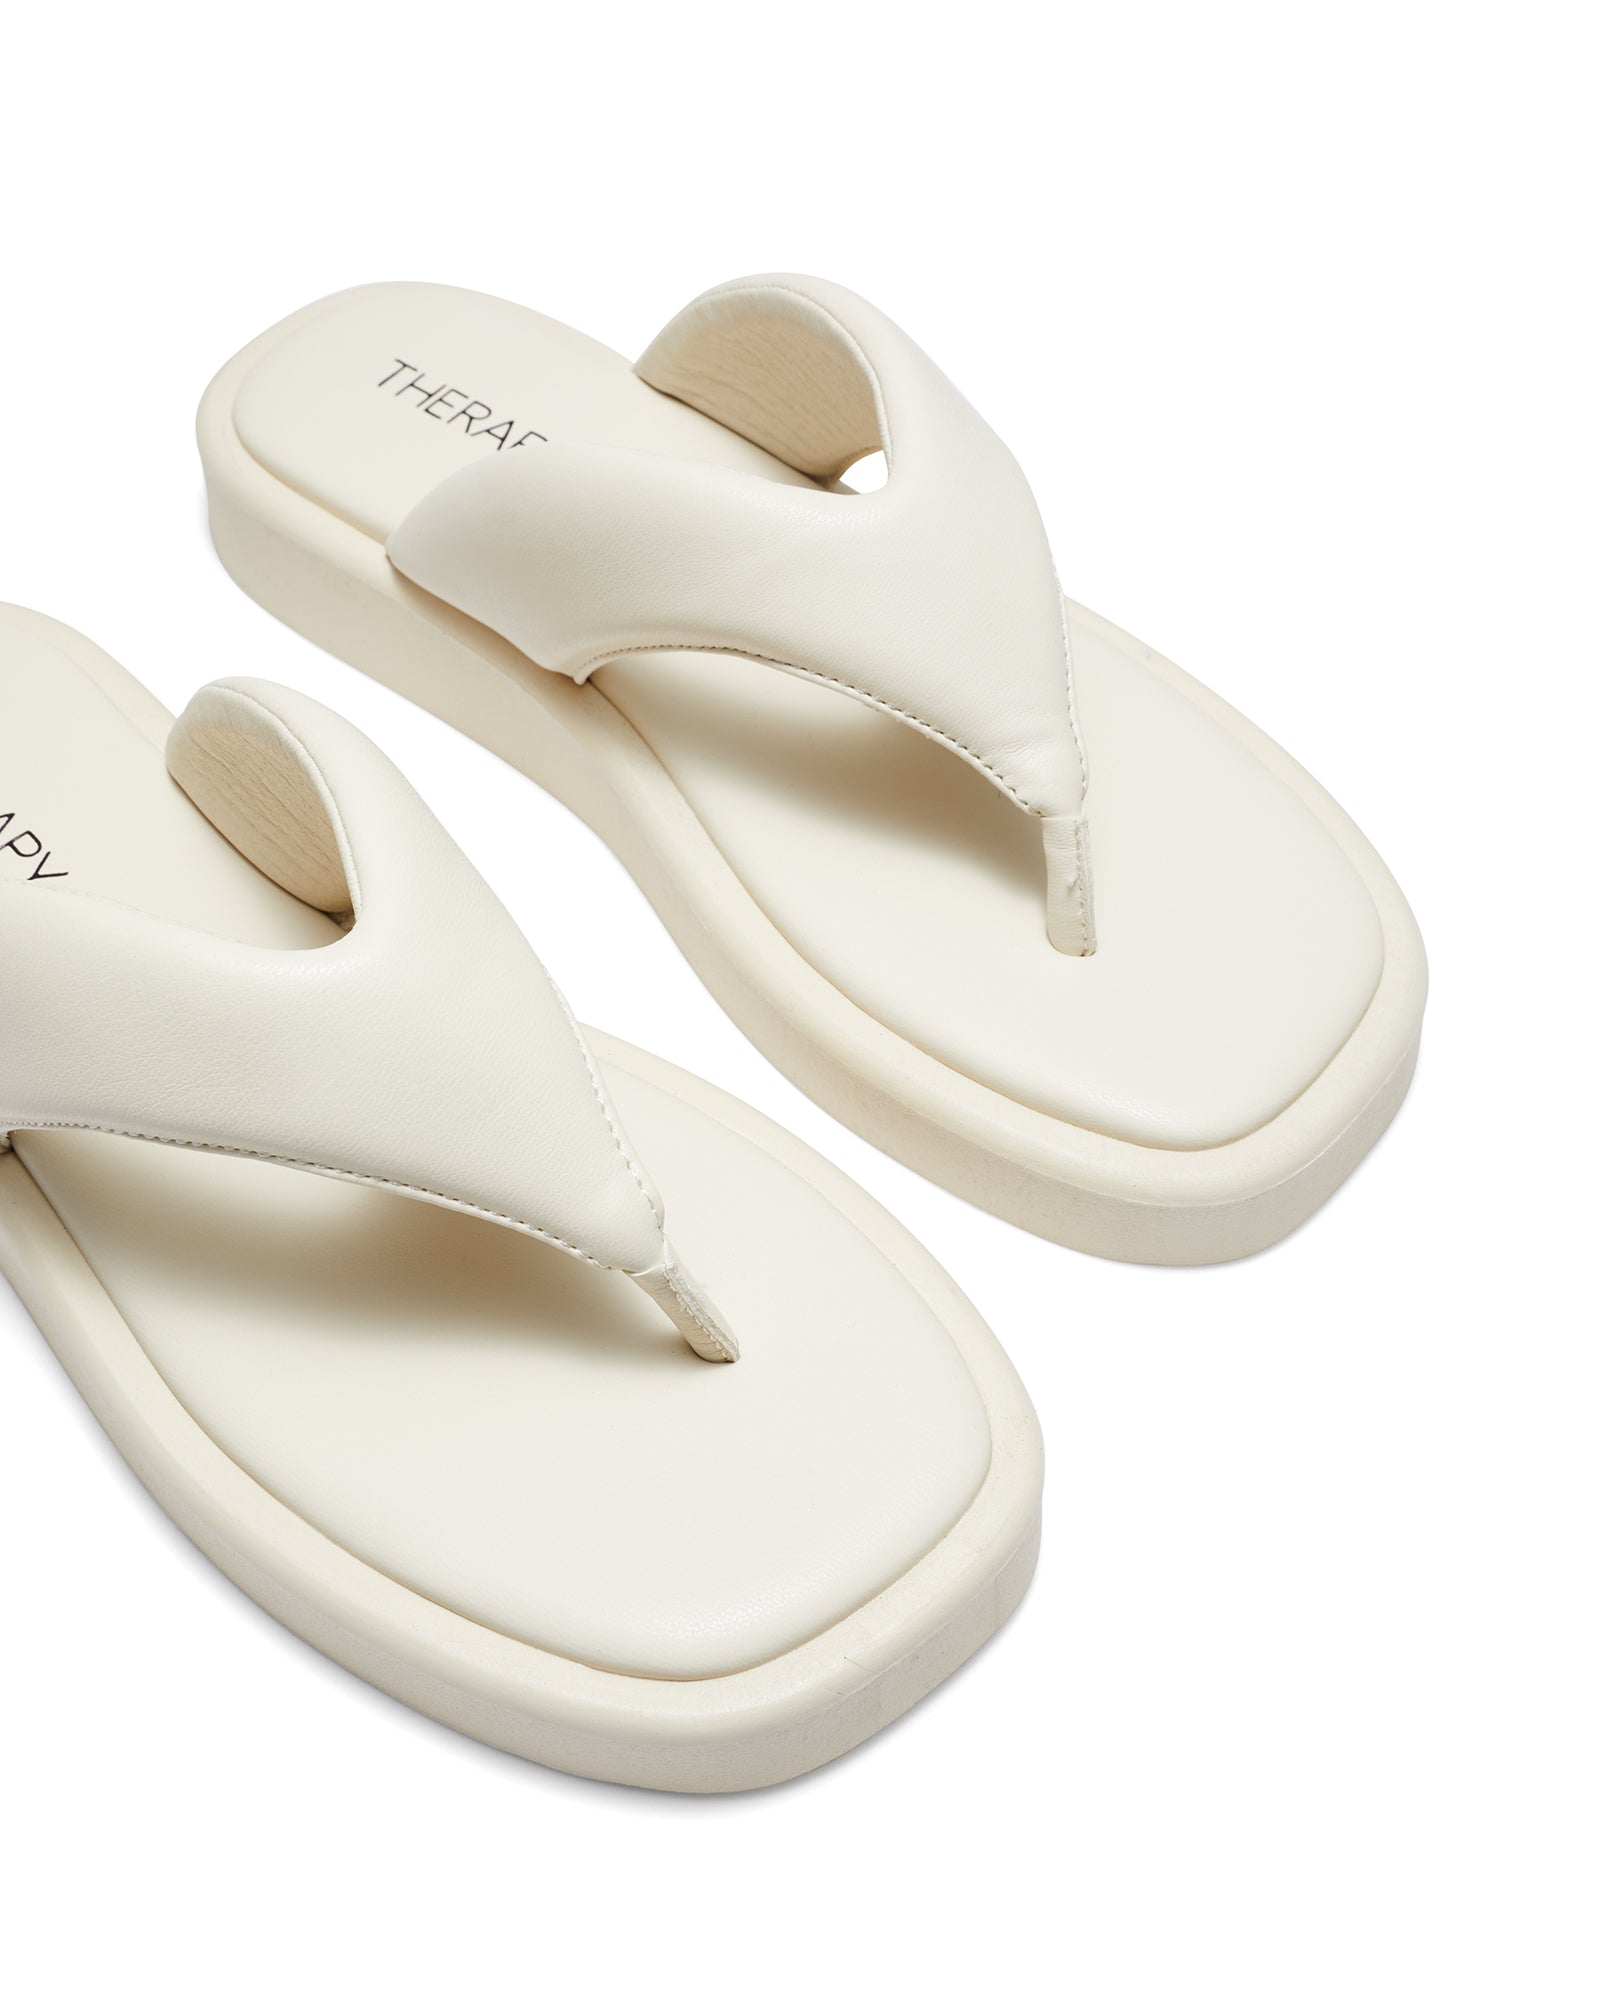 Therapy Shoes Pace Bone | Women's Sandals | Slides | Thong | Flatform